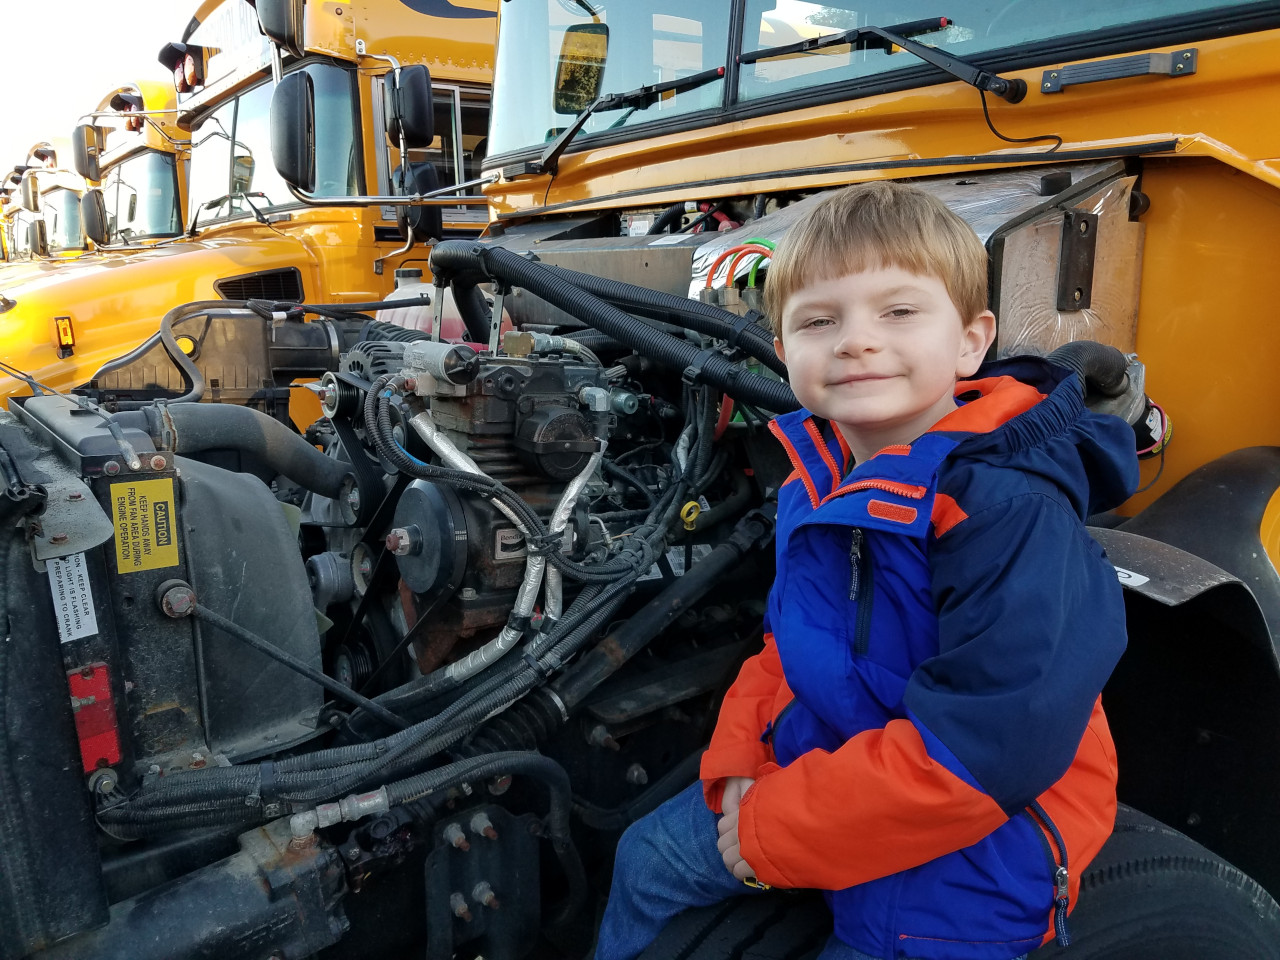 Peter wanted to check the engine in the school bus